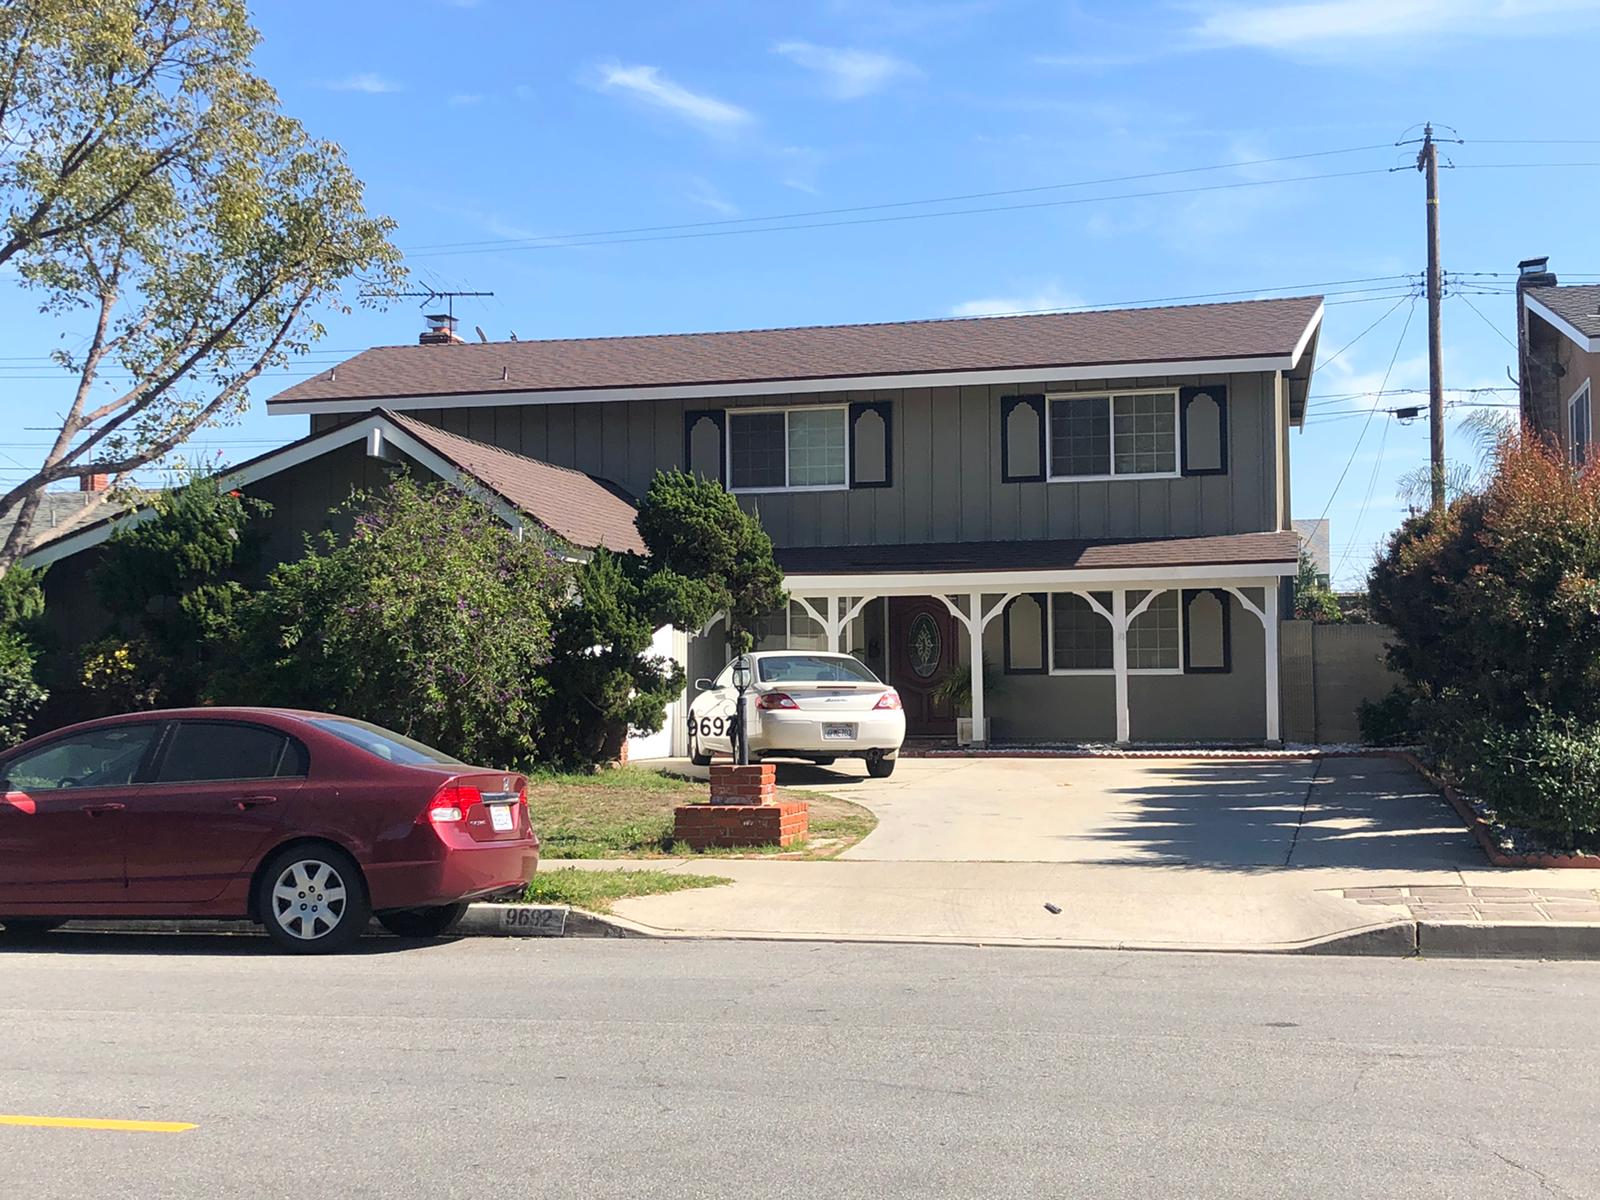 Roof Replacement in Cypress - 800 Remodeling Inc.